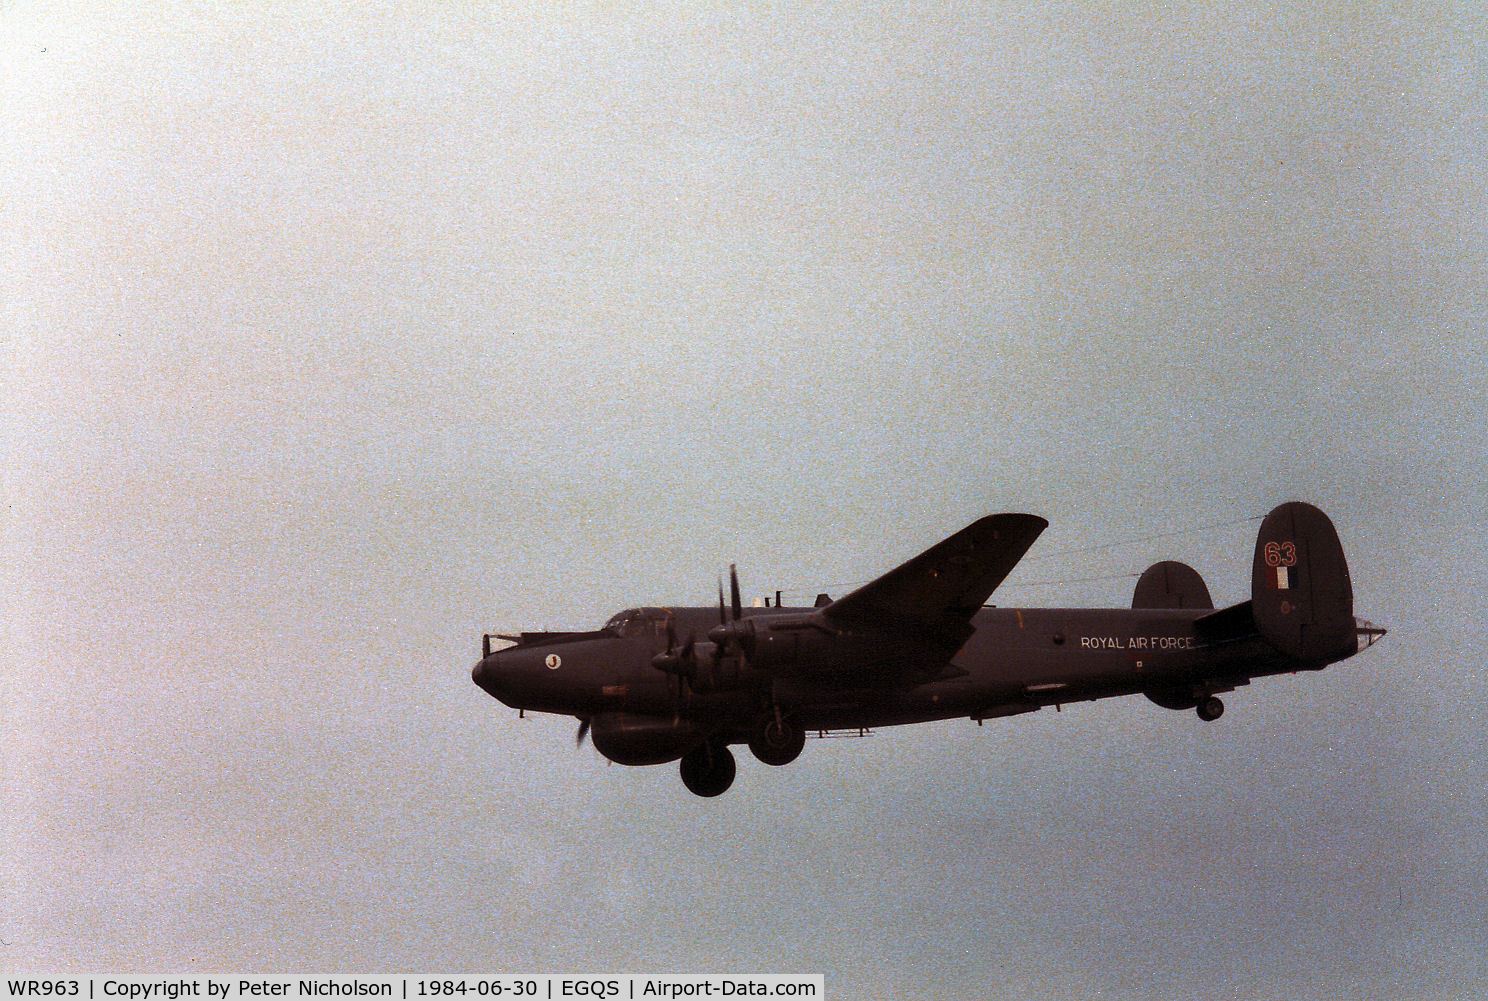 WR963, 1954 Avro 696 Shackleton AEW.2 C/N Not found WR963, Shackleton AEW.2 of 8 Squadron landing at RAF Lossiemouth in the Summer of 1984.